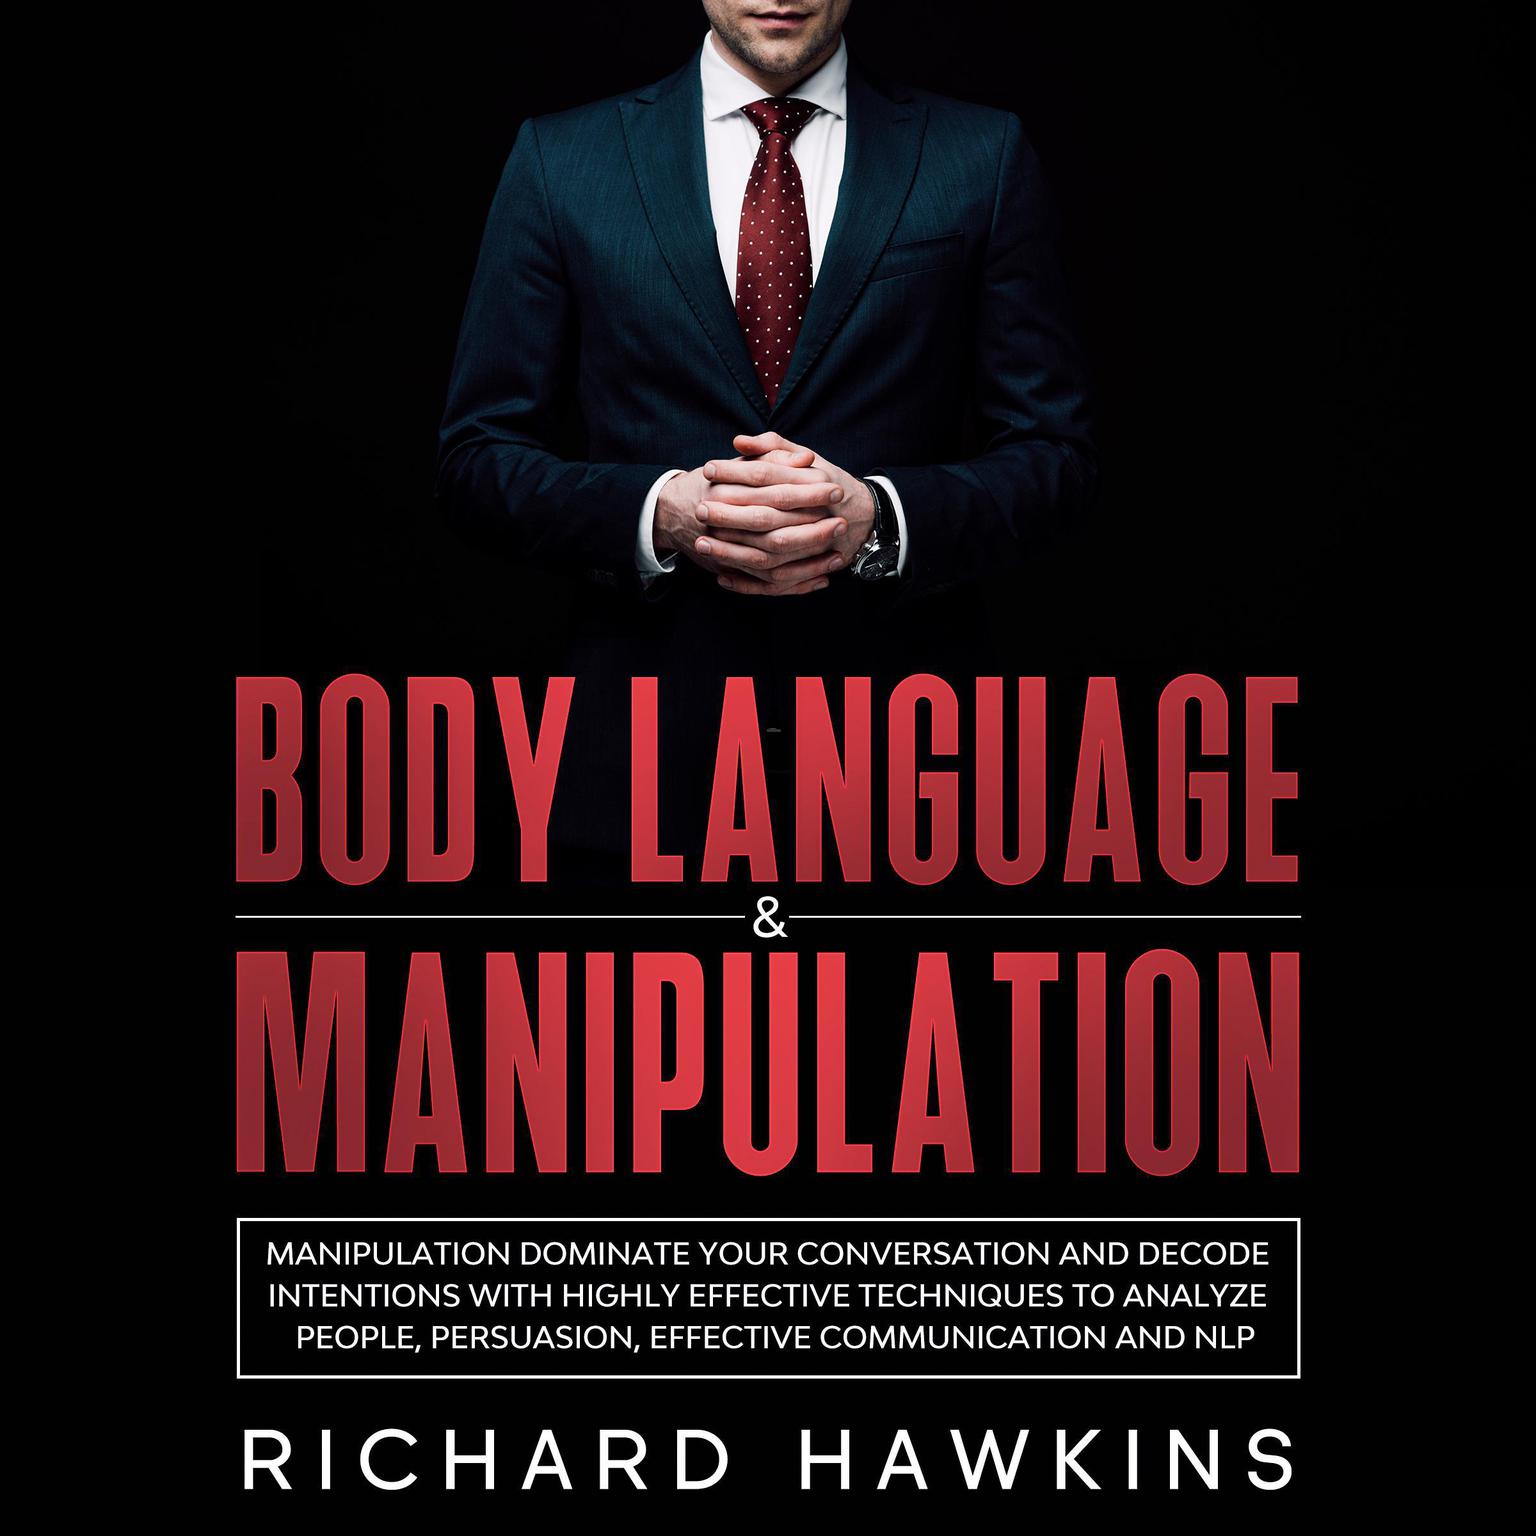 Body Language & Manipulation: Dominate Your Conversation and Decode Intentions With Highly Effective Techniques to Analyze People, Persuasion, Effective Communication and NLP Audiobook, by Richard Hawkins